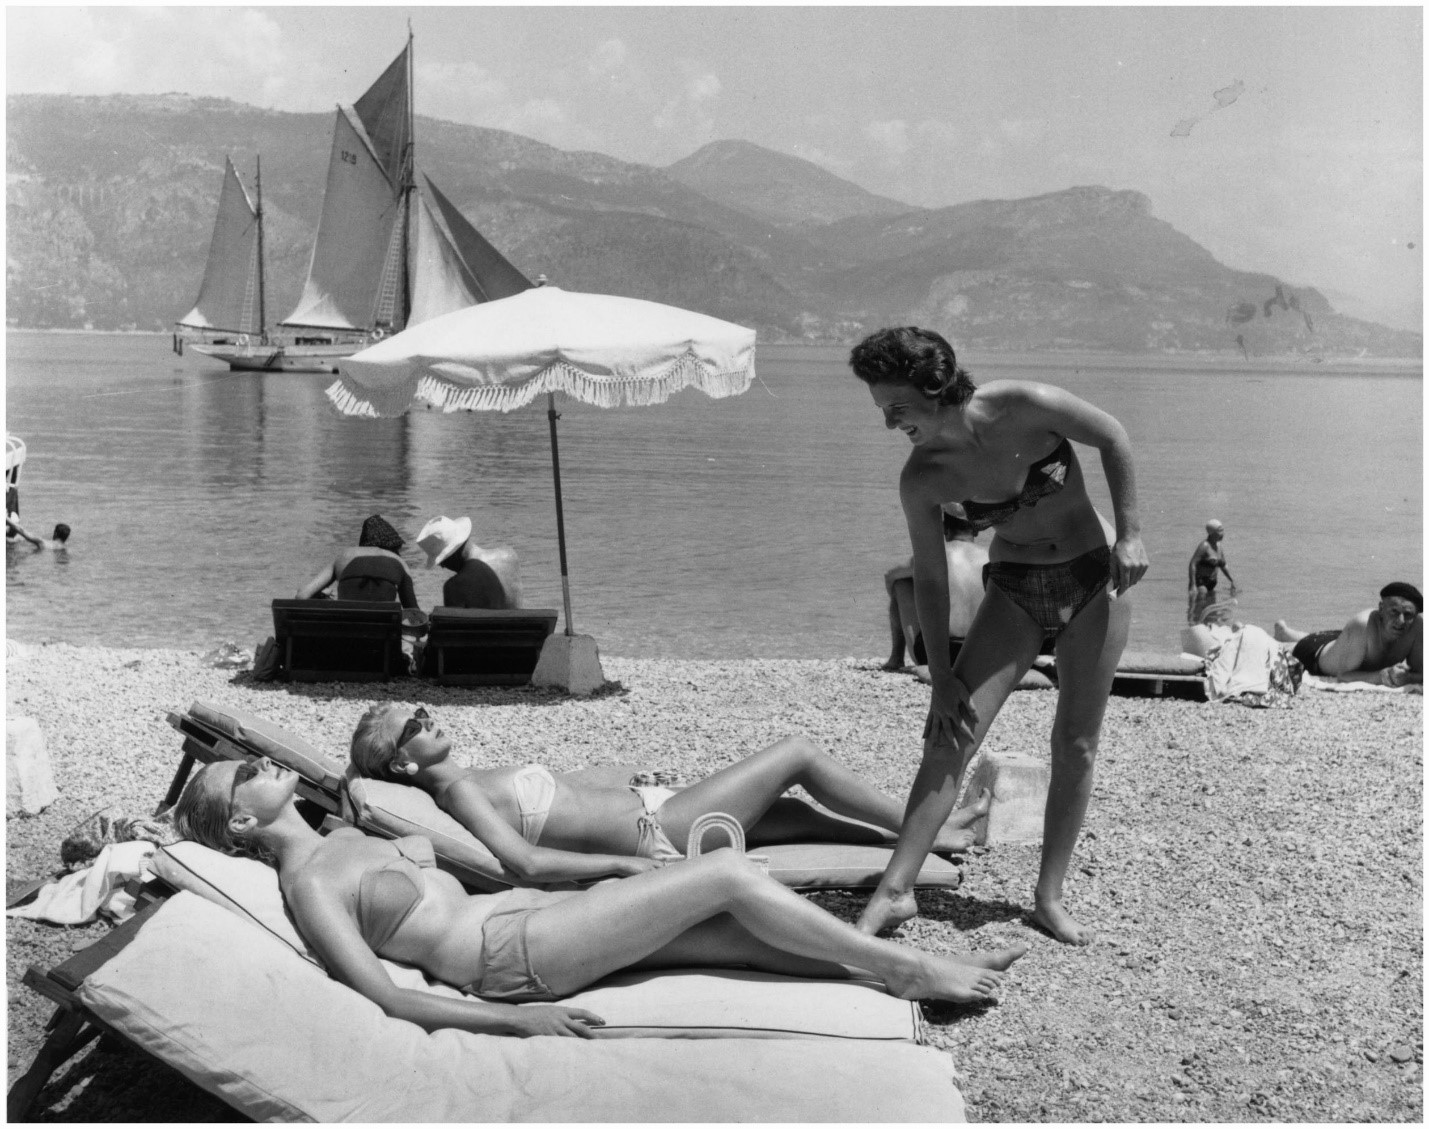 Three British models sunbathing on a beach on the Cote d’Azur during a cruise.